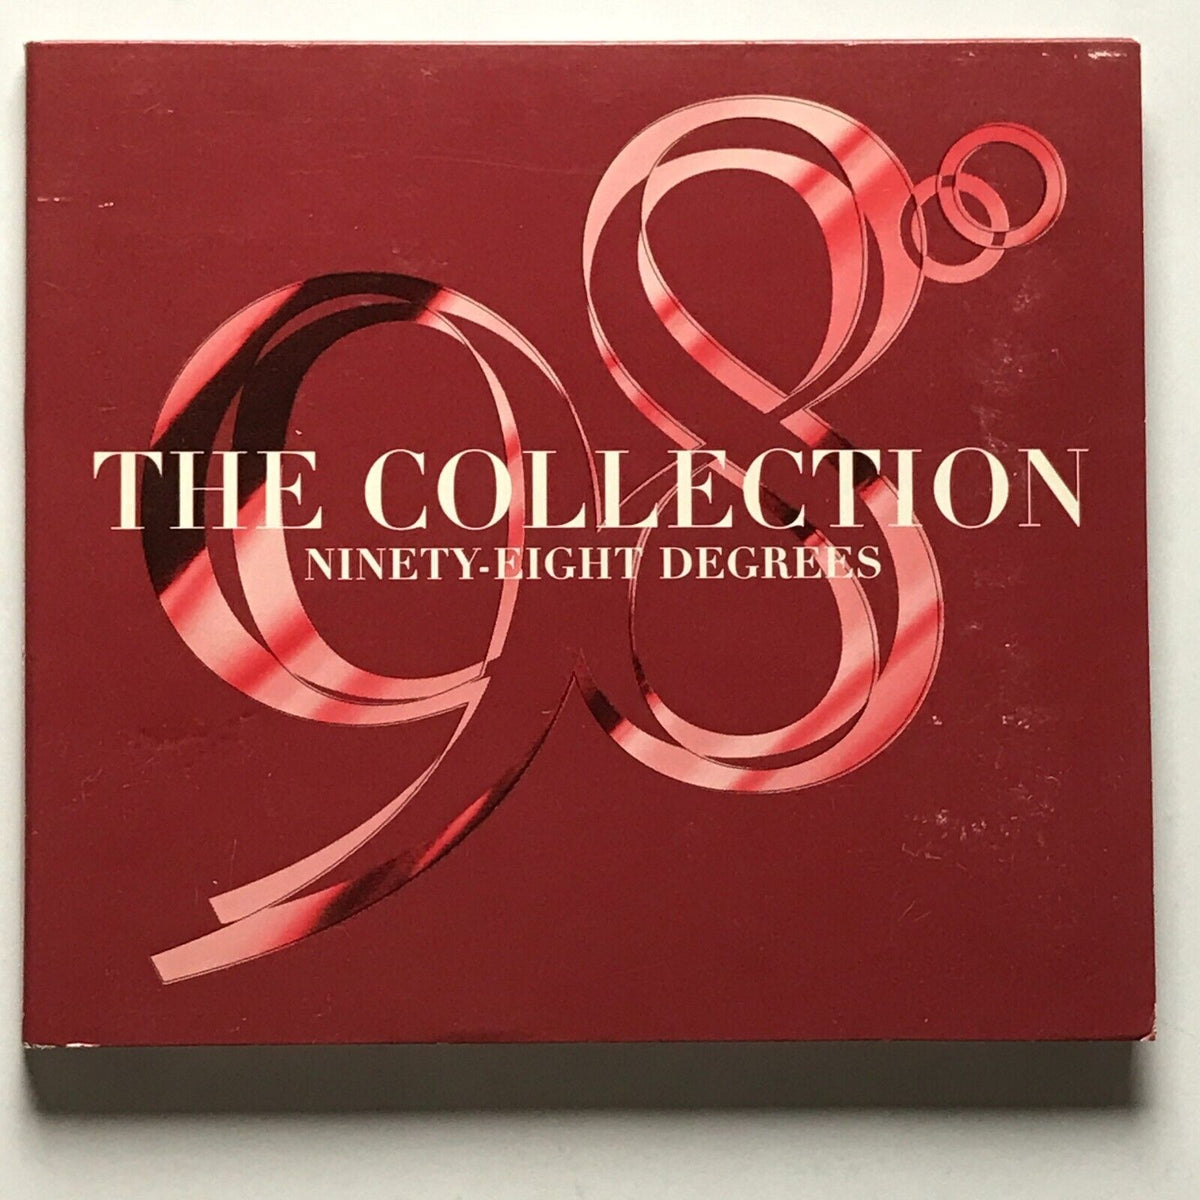 Vintage 98 Degrees and Rising CD 1998 T -  Canada